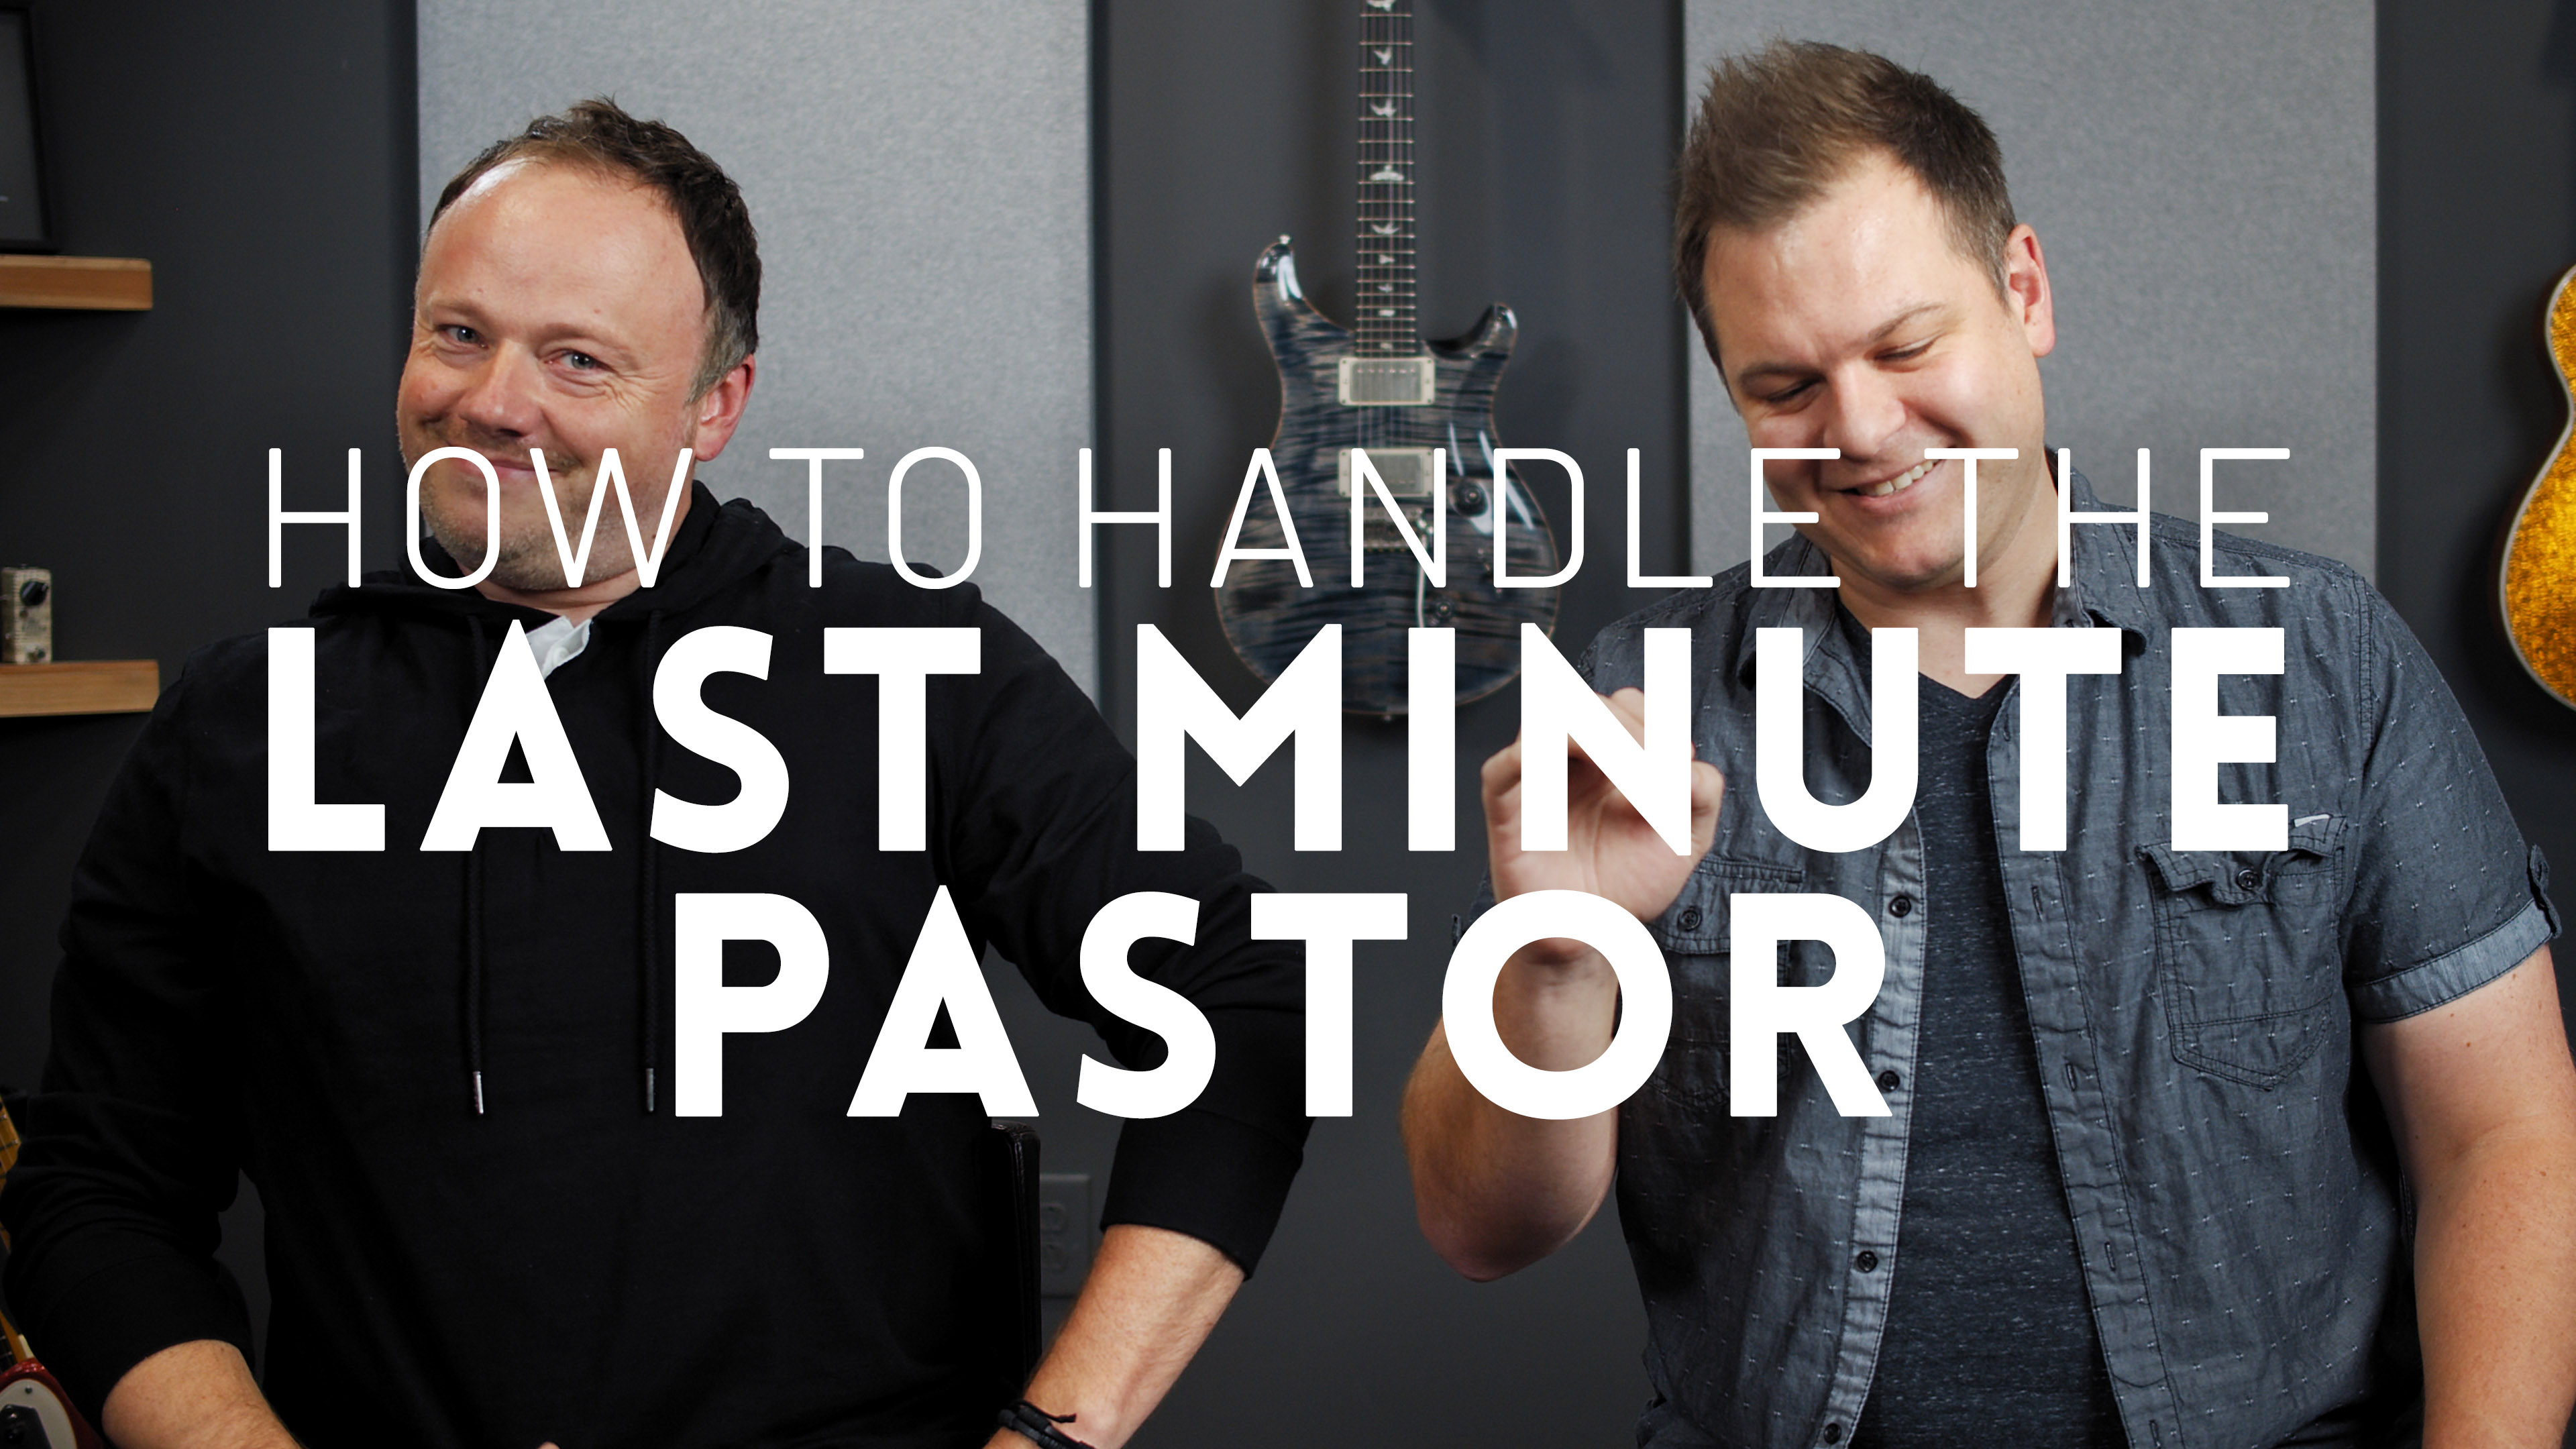 How to handle the Last Minute Pastor - Worship Tutorials